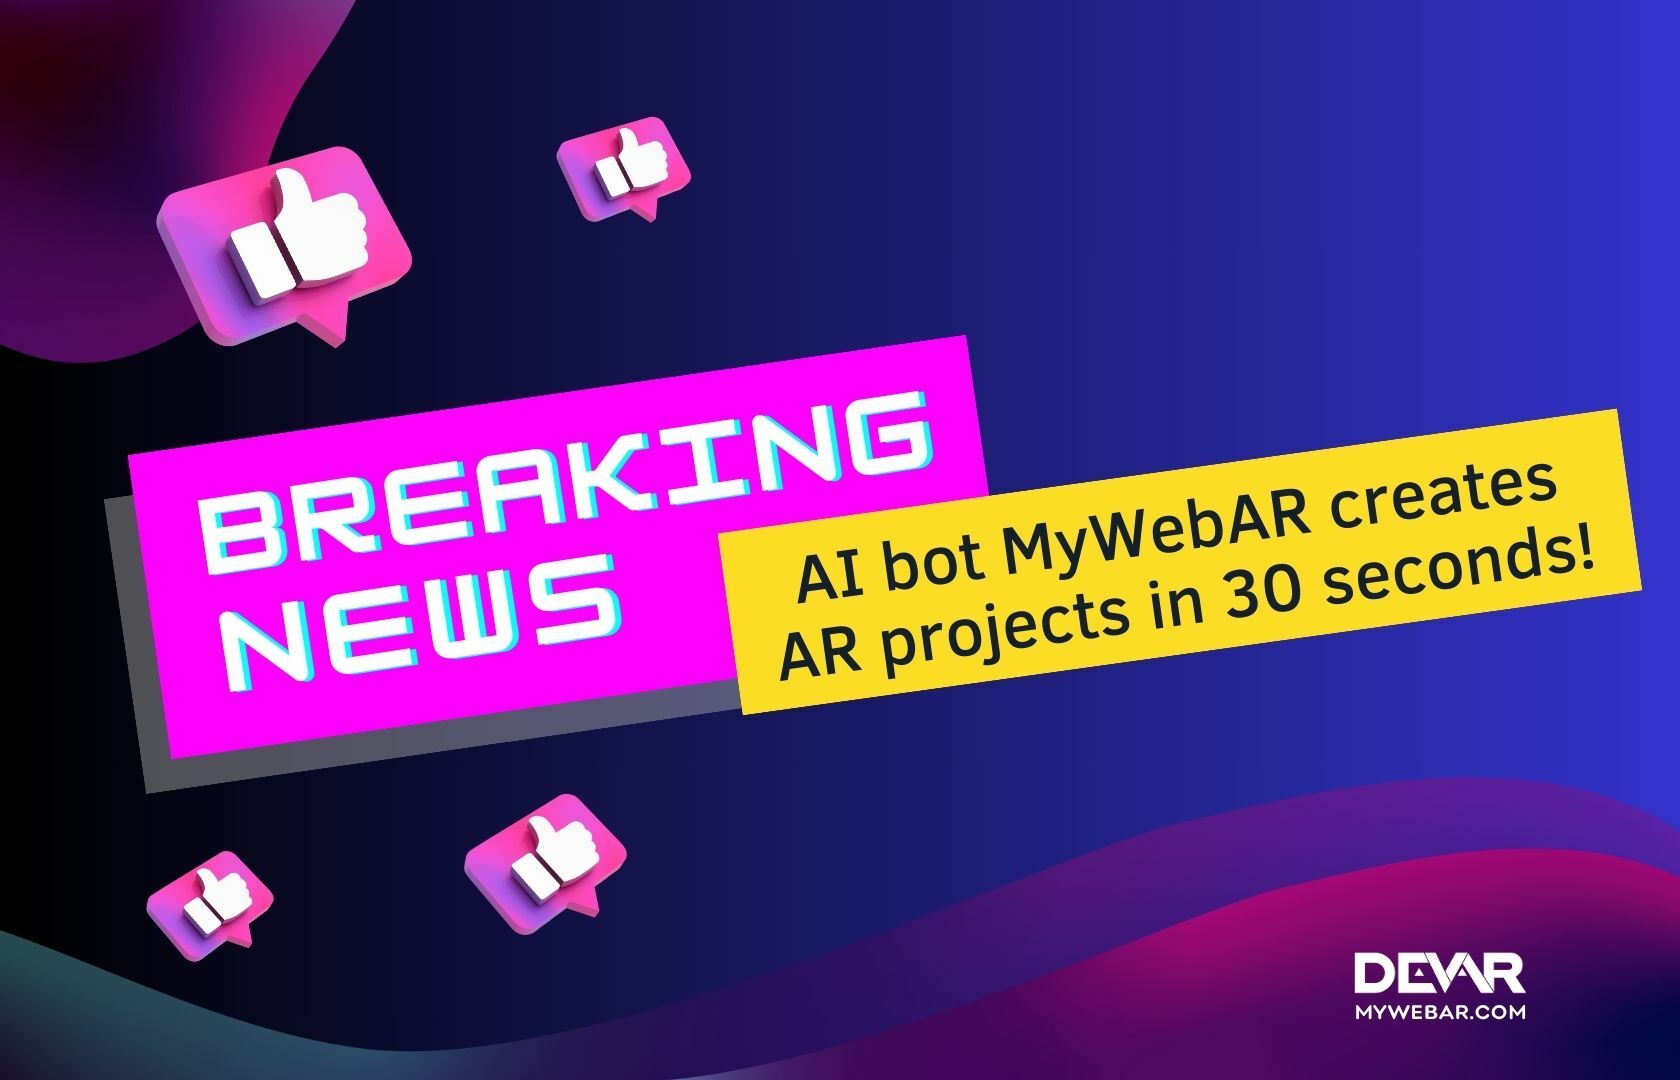 AI bot MyWebAR creates AR projects in 30 seconds